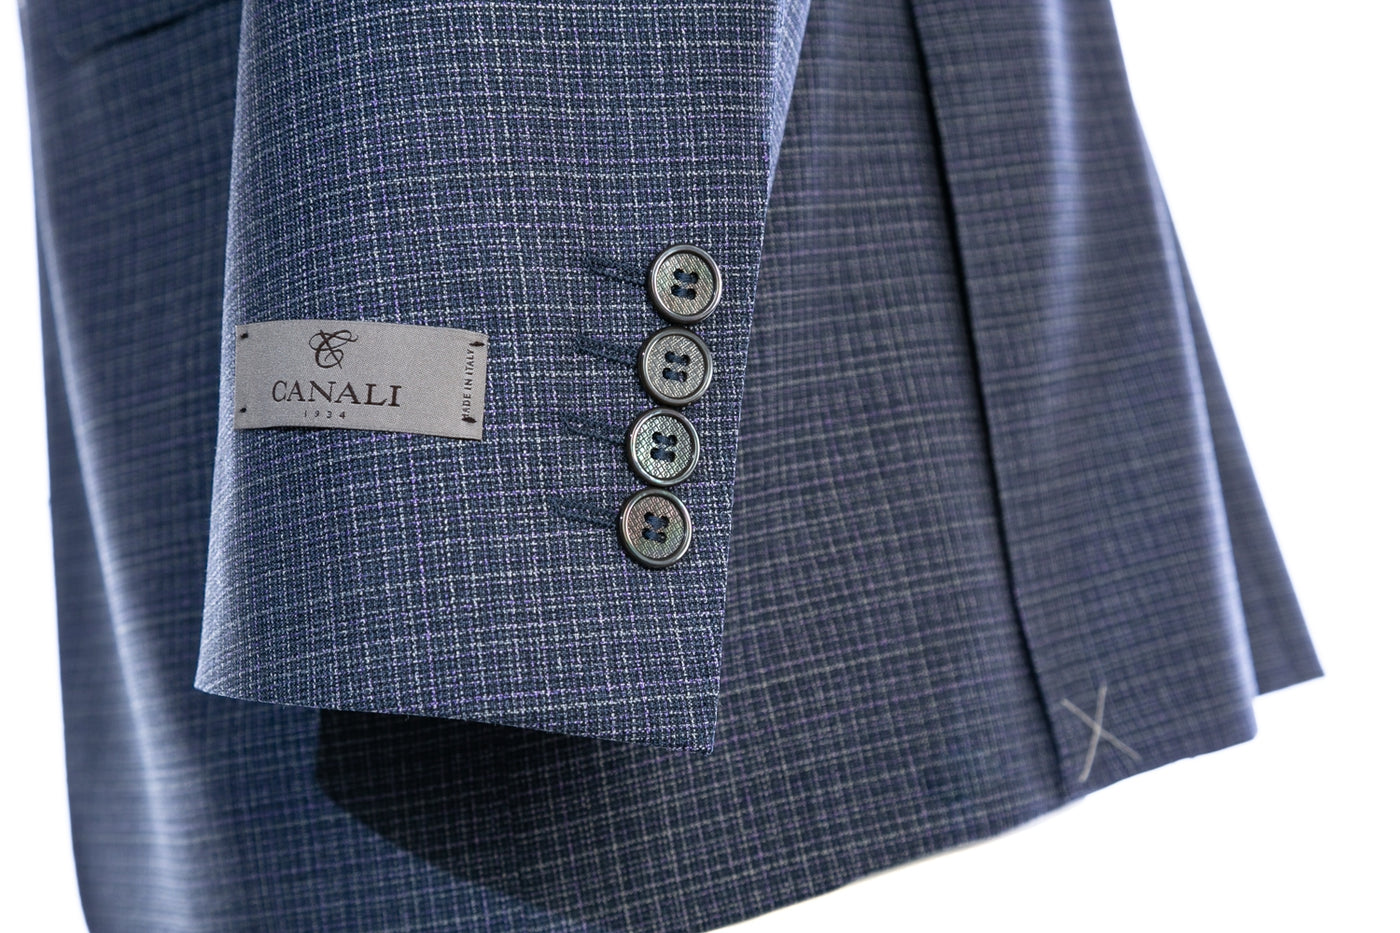 Canali Weave With Notch Lapel Suit in Blue Cuff